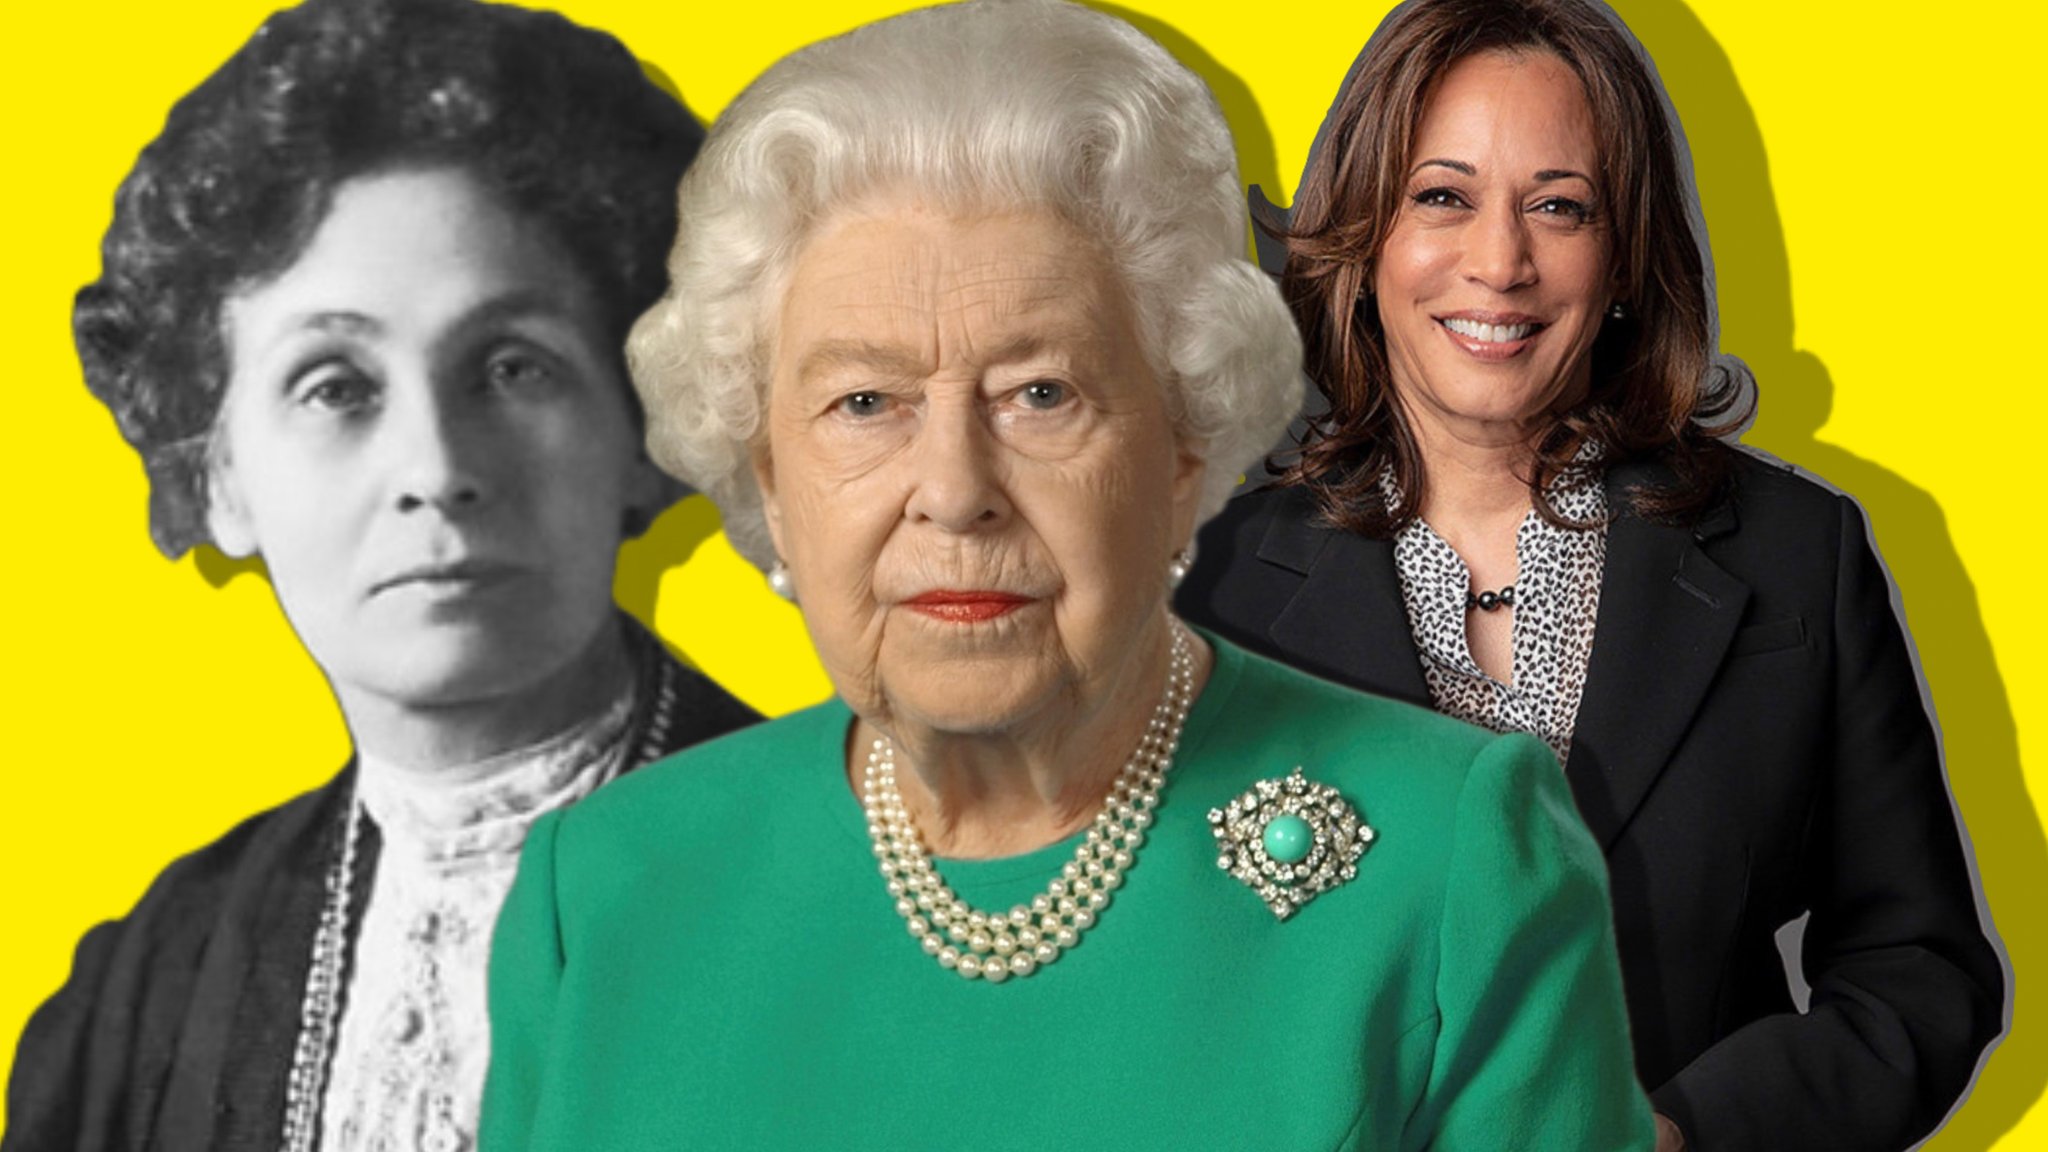 Top 10 Most Encouraging Women Business Tycoons in the World